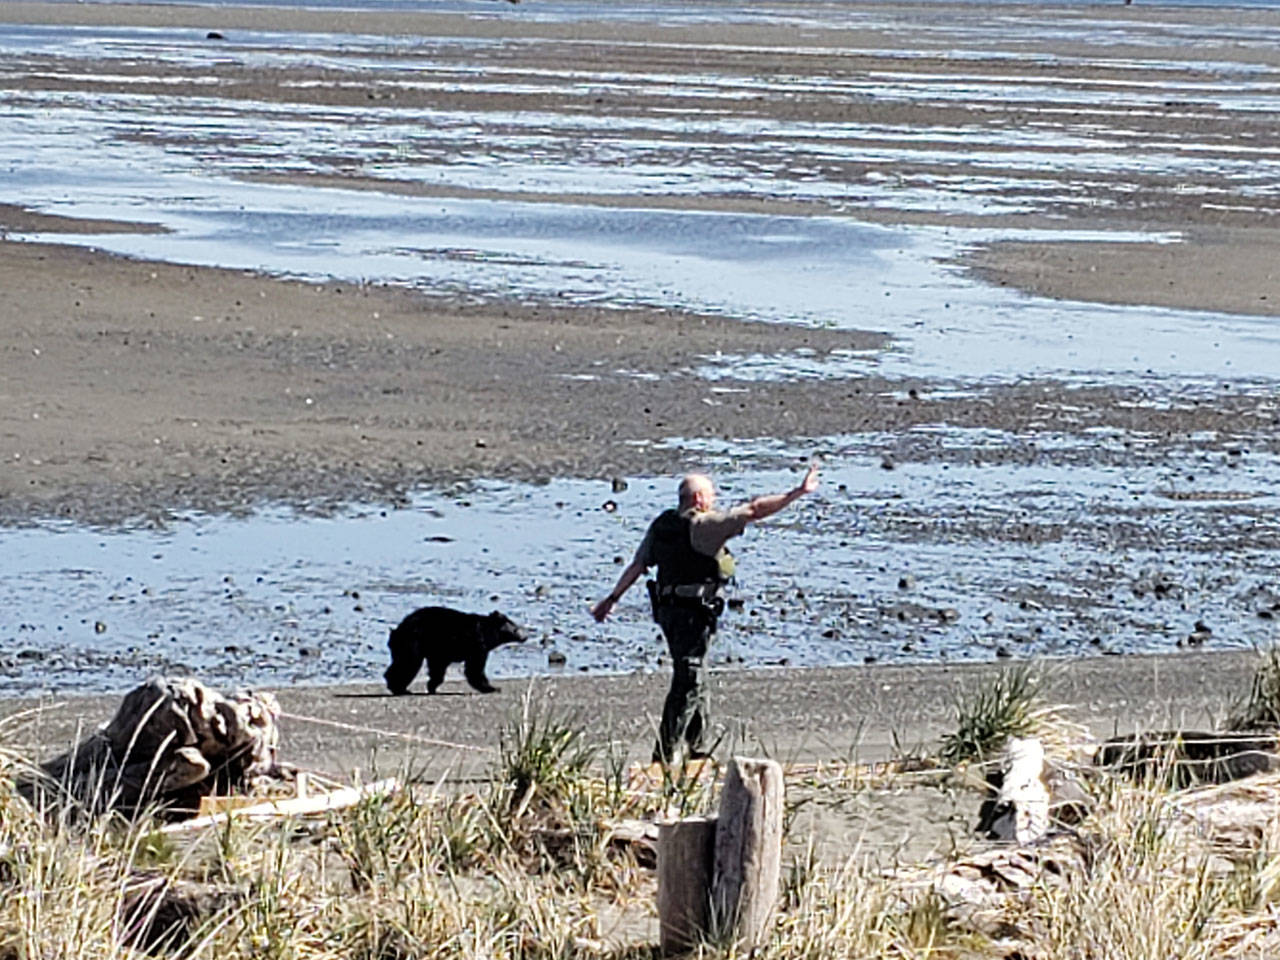 Officers with the Washington Department of Fish and Wildlife’s Law Enforcement Program look to divert a black bear from residents and homes north of Sequim this past weekend. (Photo courtesy of Washington Department of Fish and Wildlife)